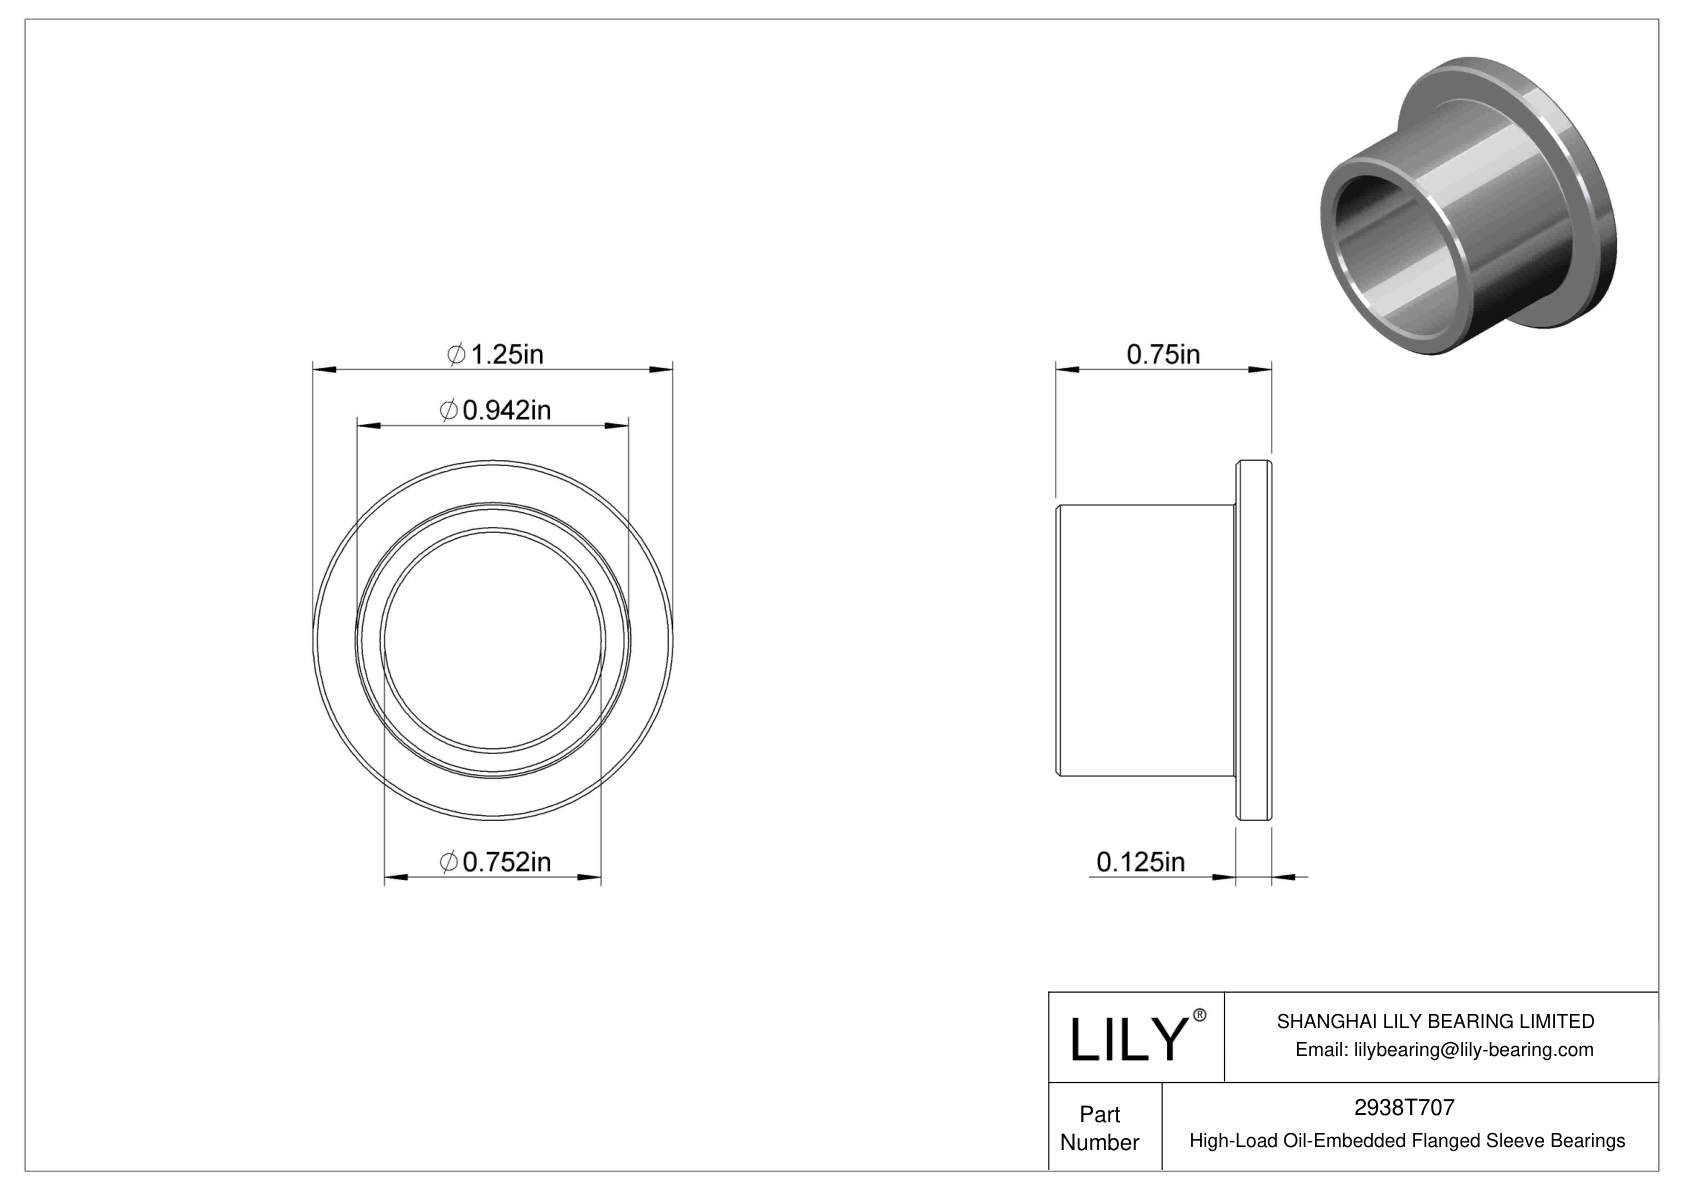 CJDITHAH High-Load Oil-Embedded Flanged Sleeve Bearings cad drawing